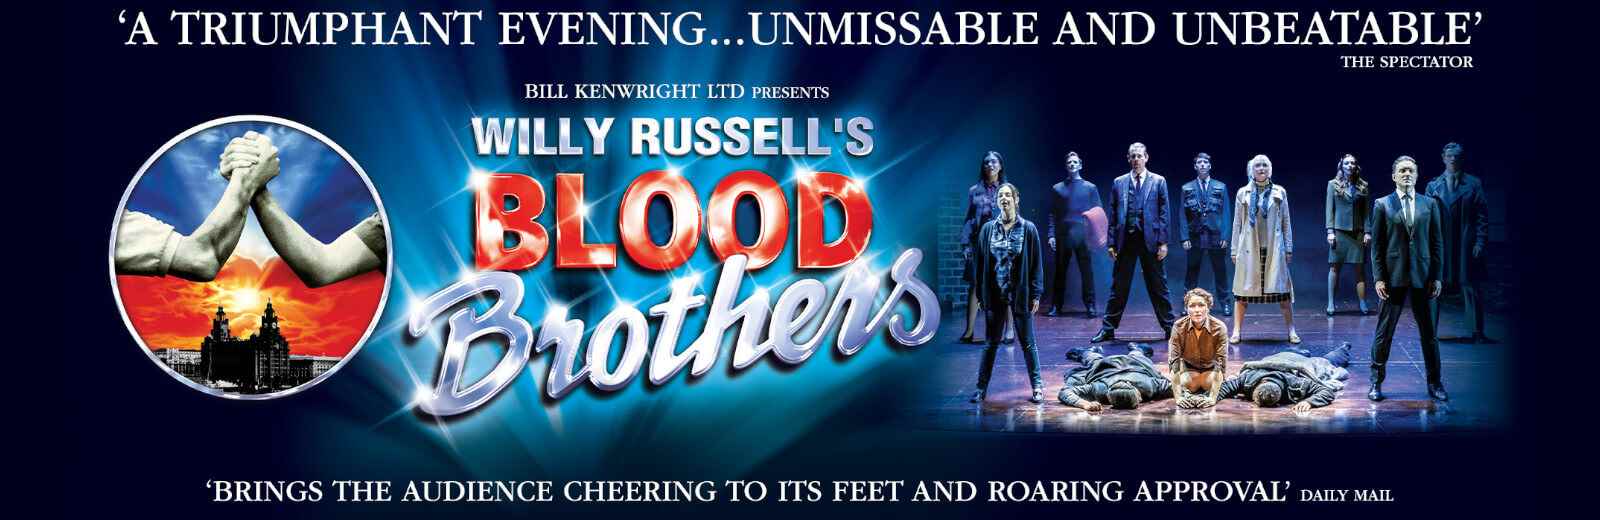 Touch Tour for the visually impaired - Blood Brothers